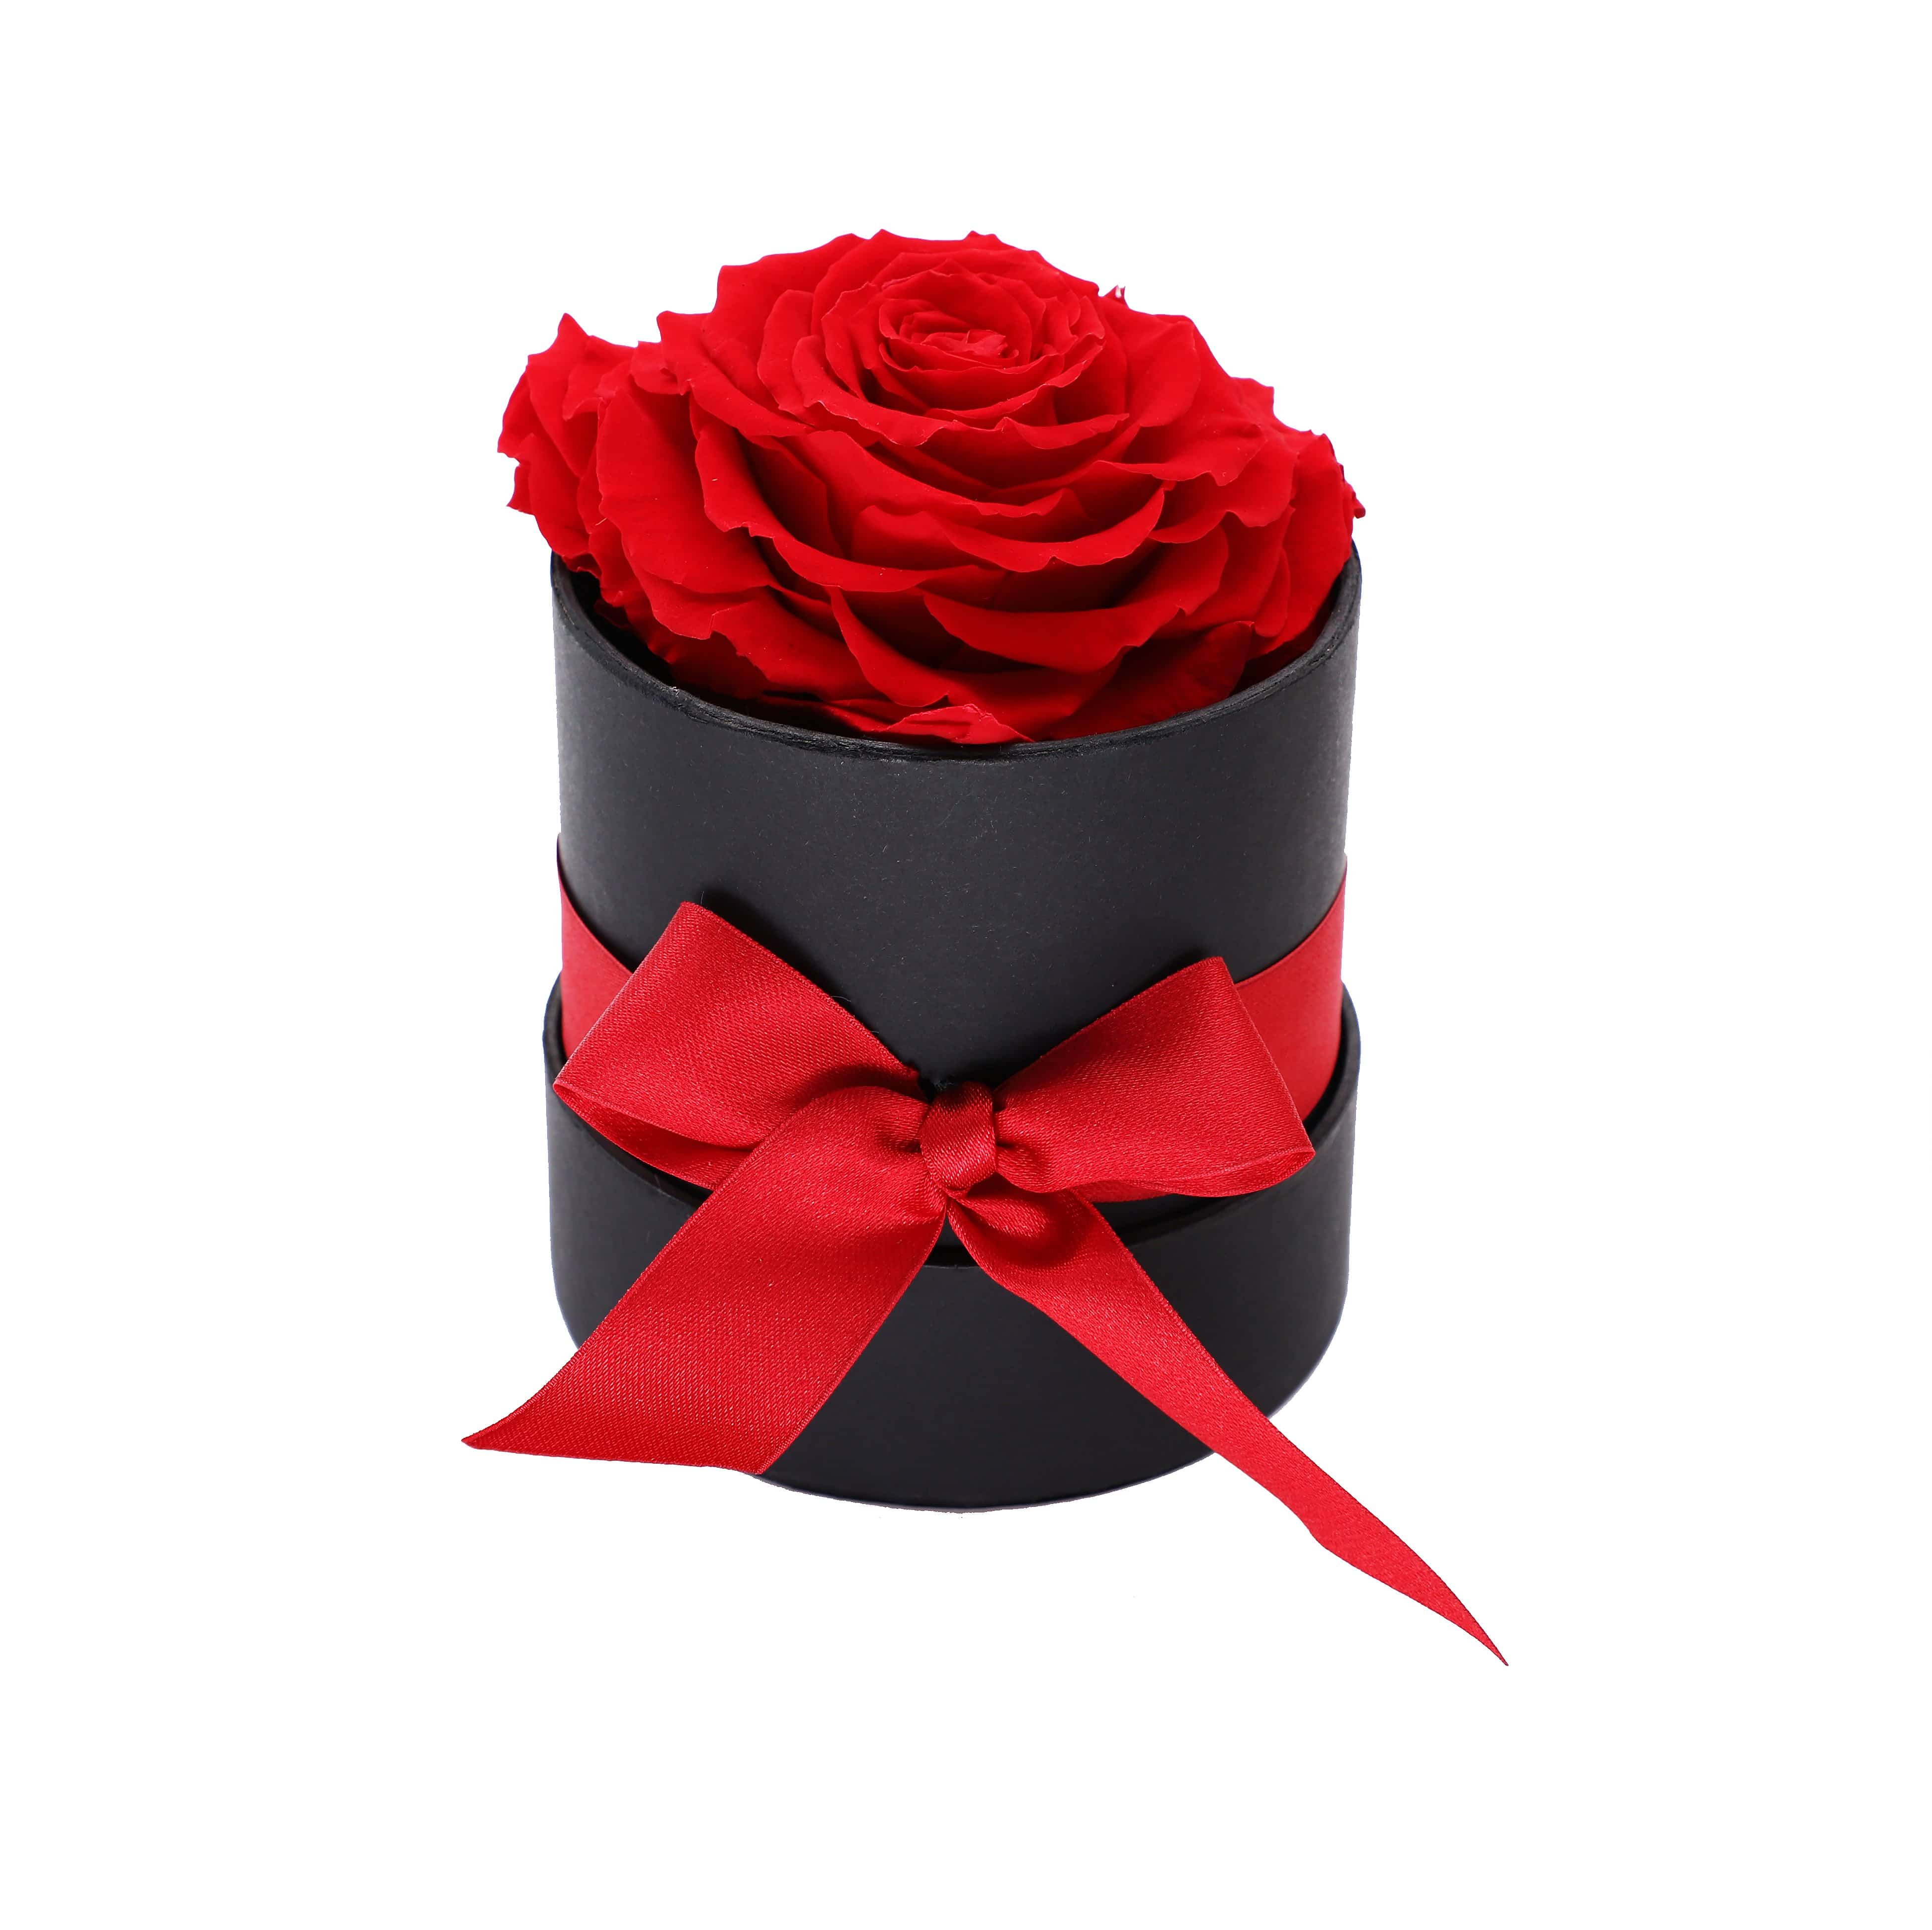 Red Heart Shape Forever Rose in A Box- Black Gift Box - Le Jardin Infini Roses in a Box